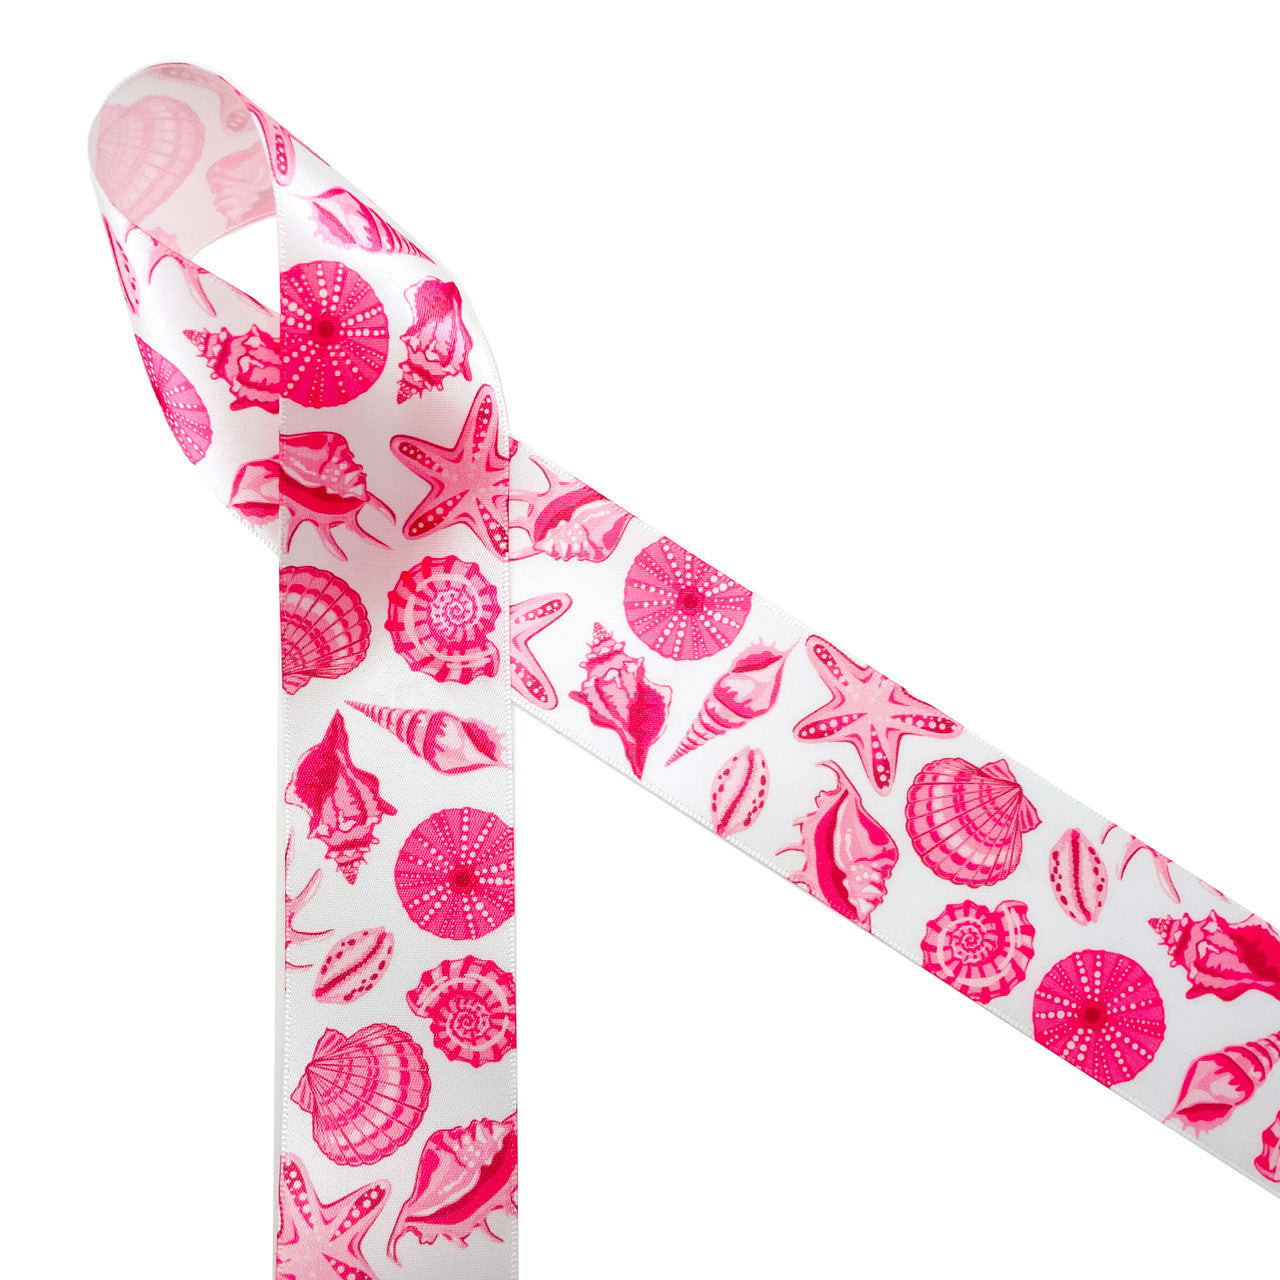 Seashells in pink printed on 1.5" white single face satin ribbon is  the ideal ribbon for Summer weddings, parties, home decor, gift wrap and quilting projects. This beautiful ribbon will make a big impact on all your Summer soirees! All our ribbon is designed and printed in the USA